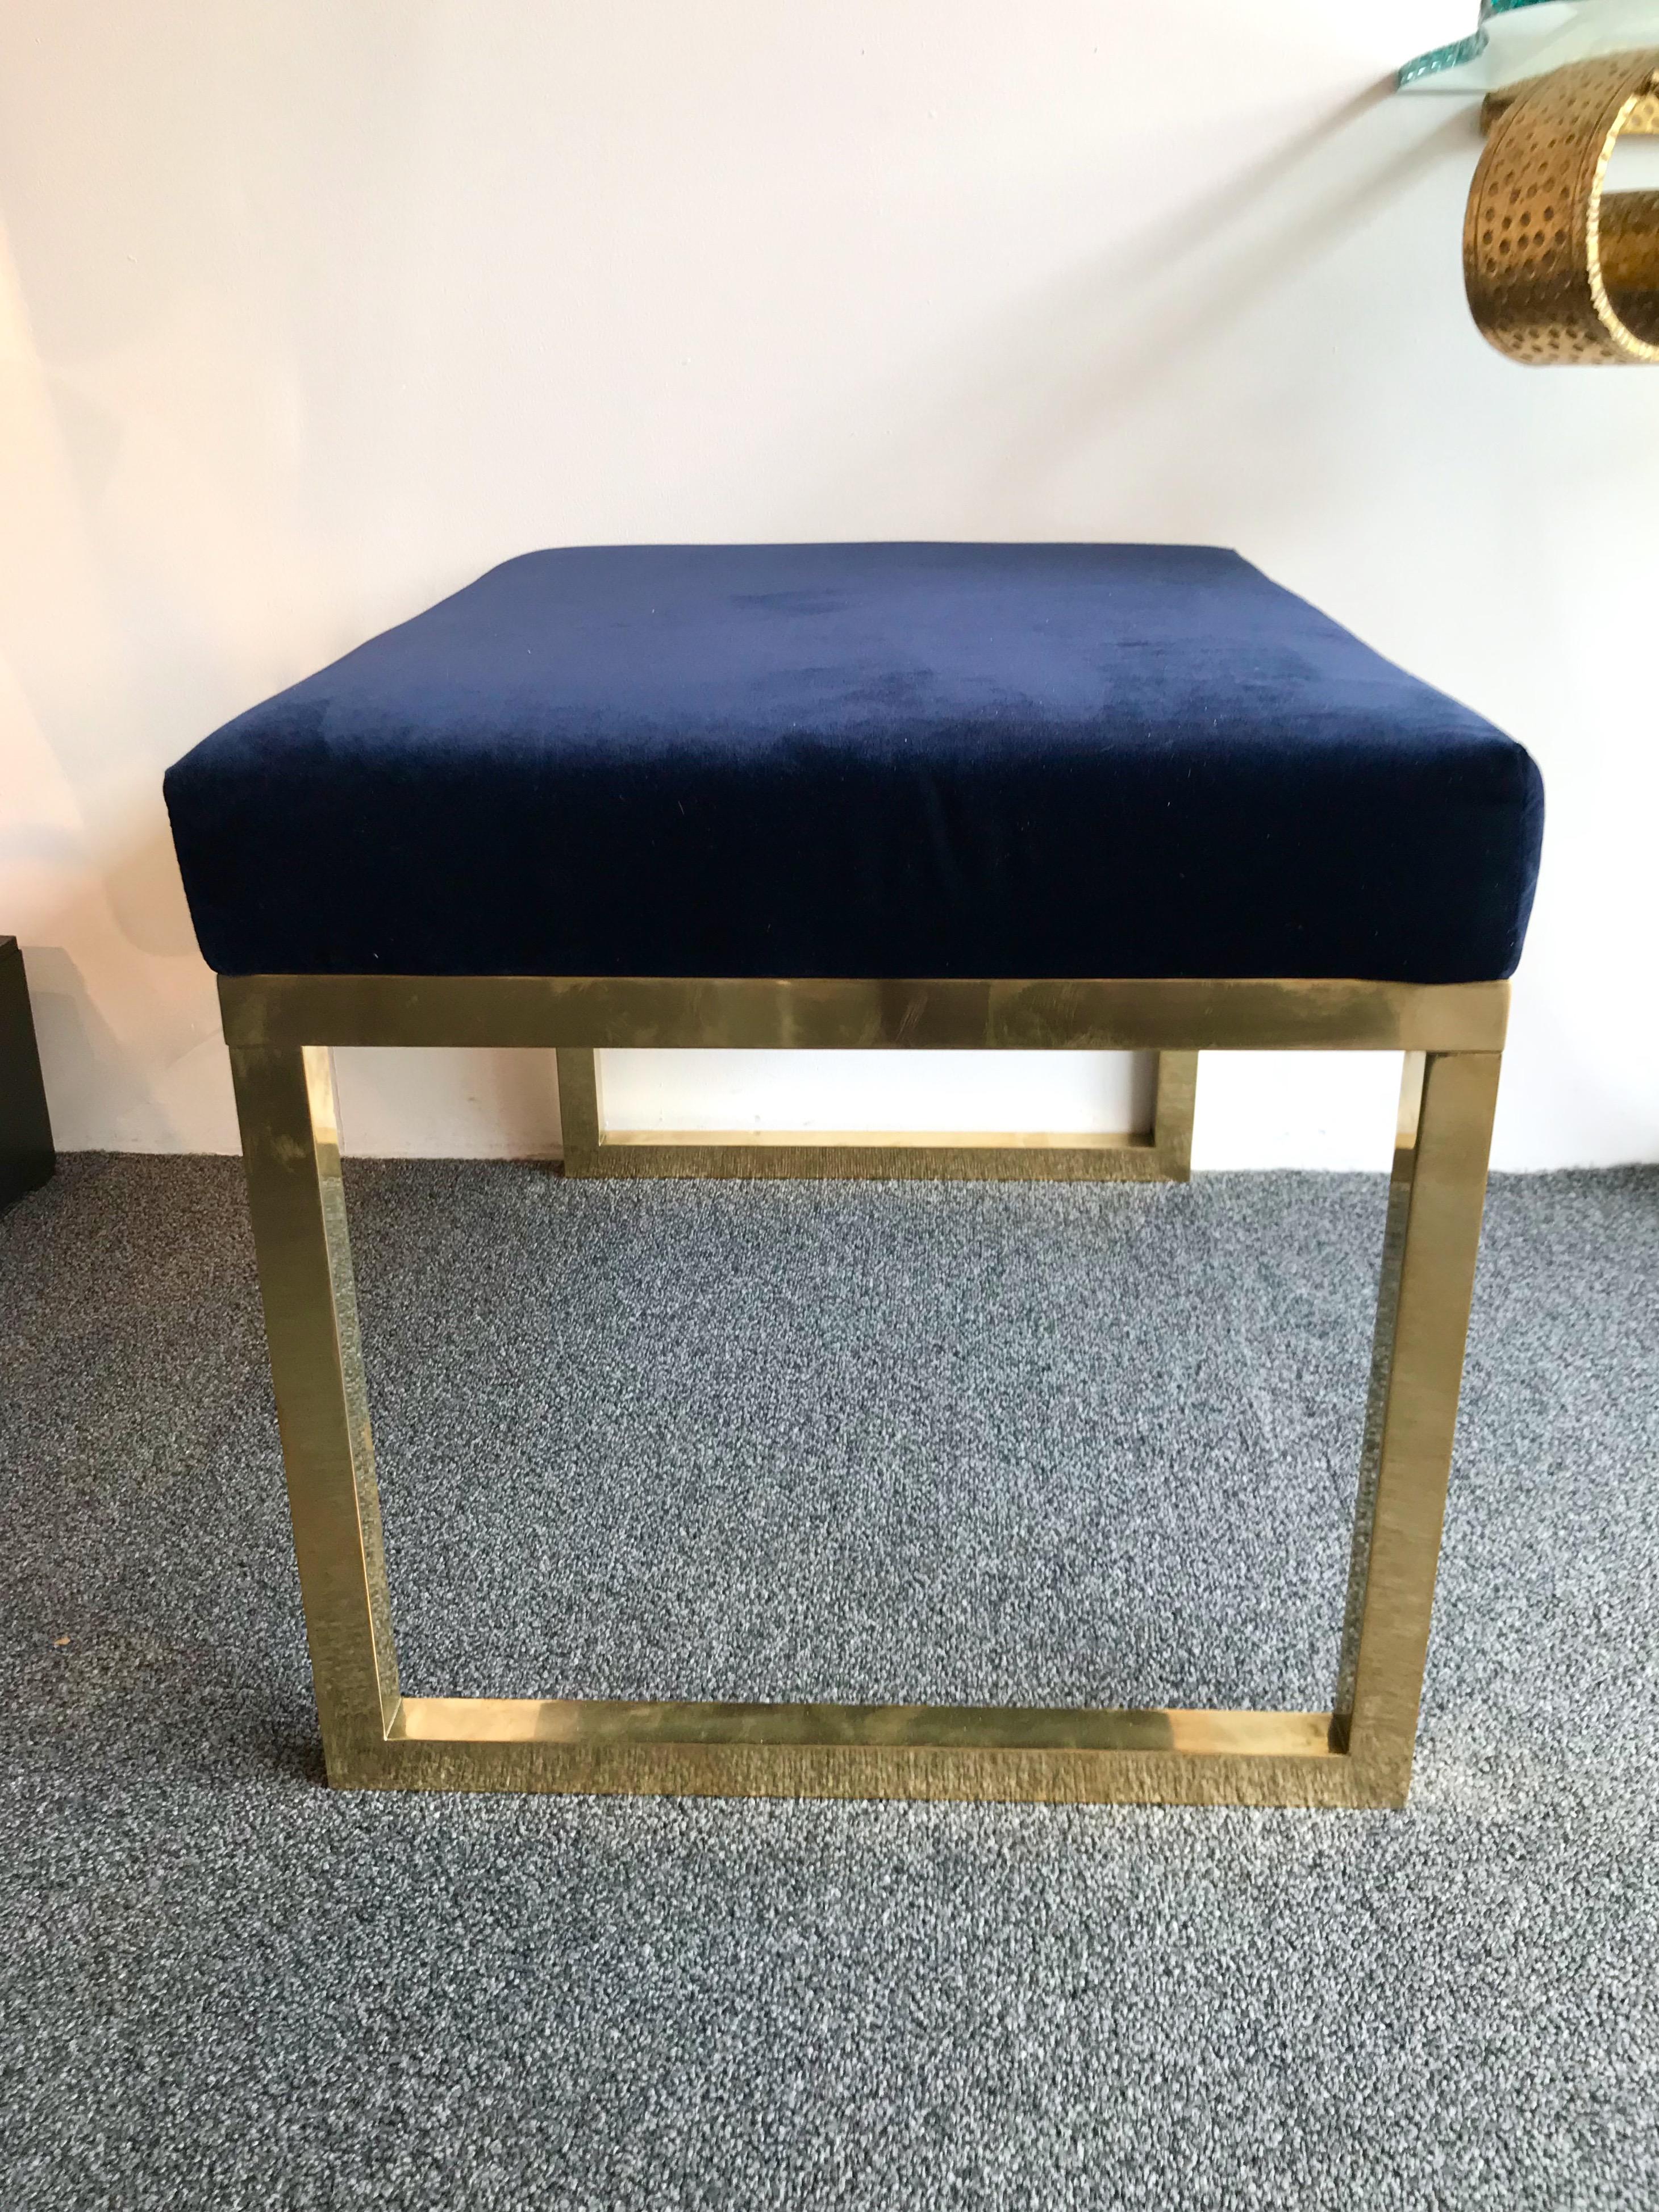 Large pair of poufs stools, footstools or ottomans in natural brass with a nice blue velvet fabric.